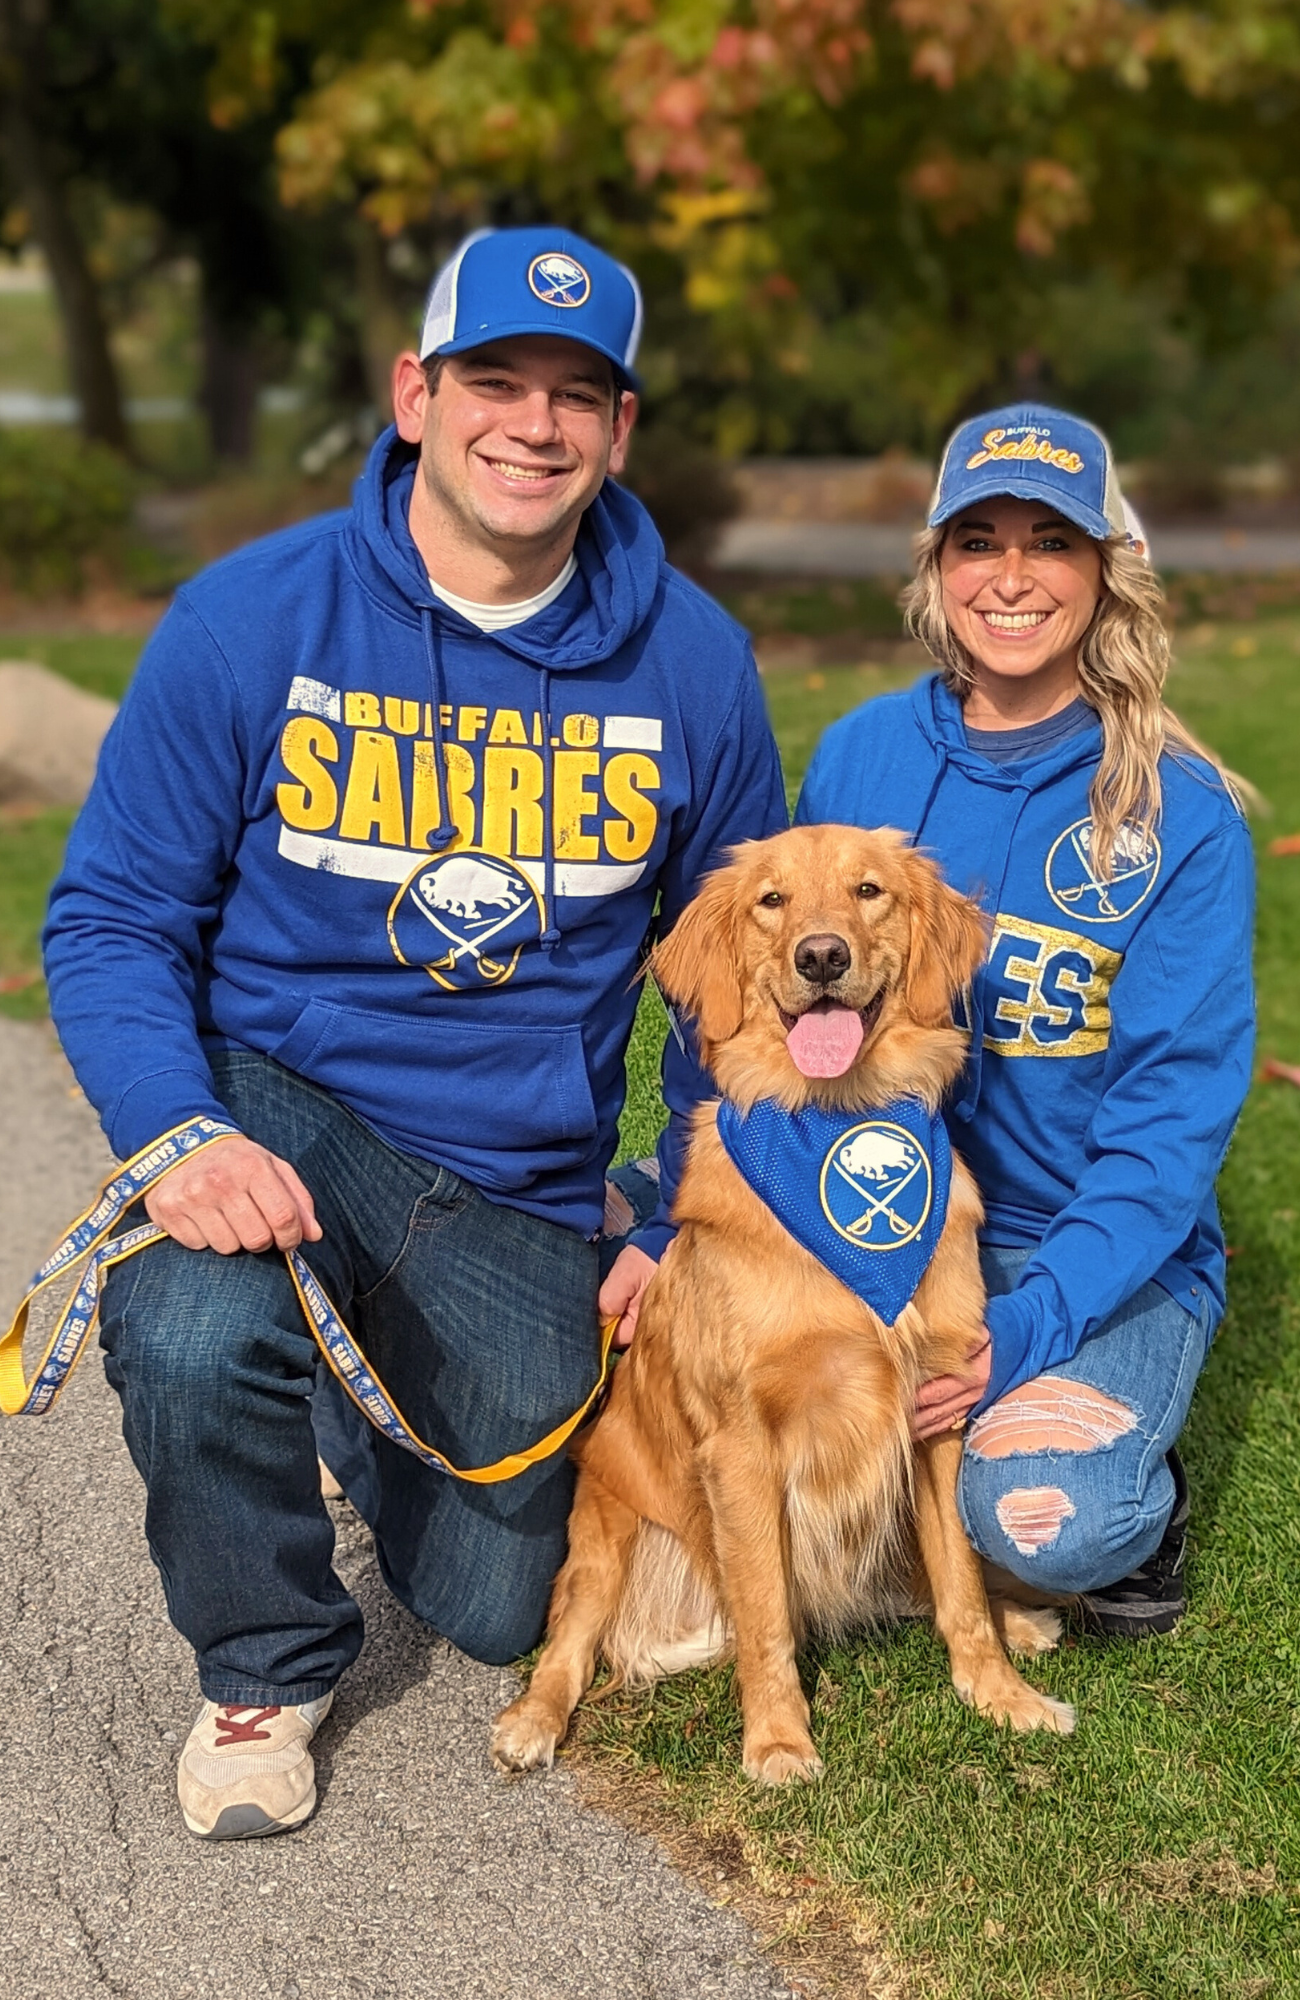 man, woman, and dog posing for picture in a park wearing buffalo sabres clothing